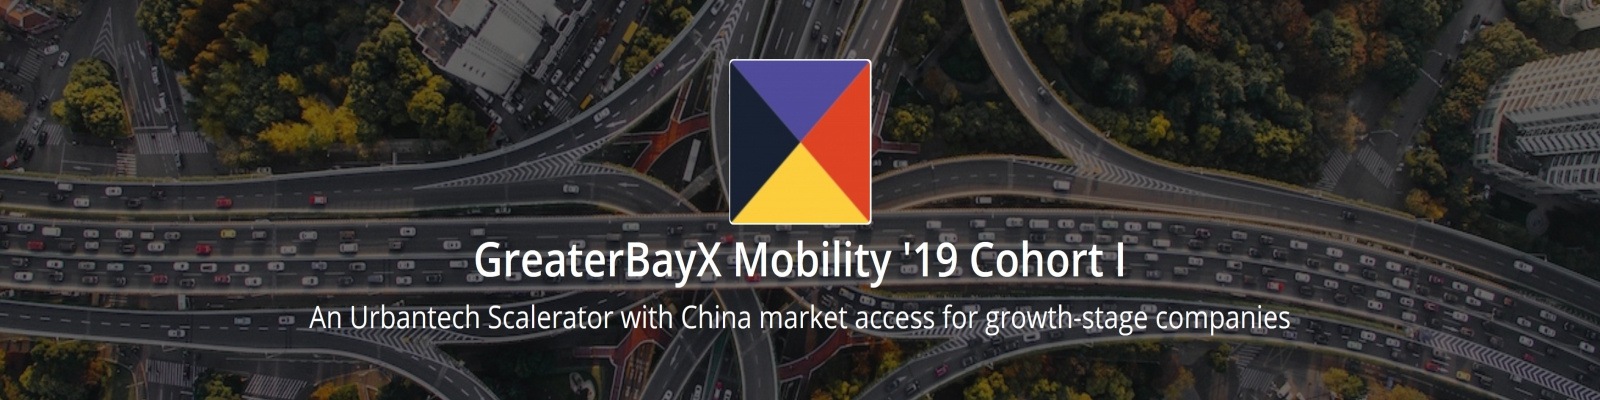 GreaterBayX 8-Week Cross-Border Mobility/Smart-City Scalerator Project Looking For Applicants